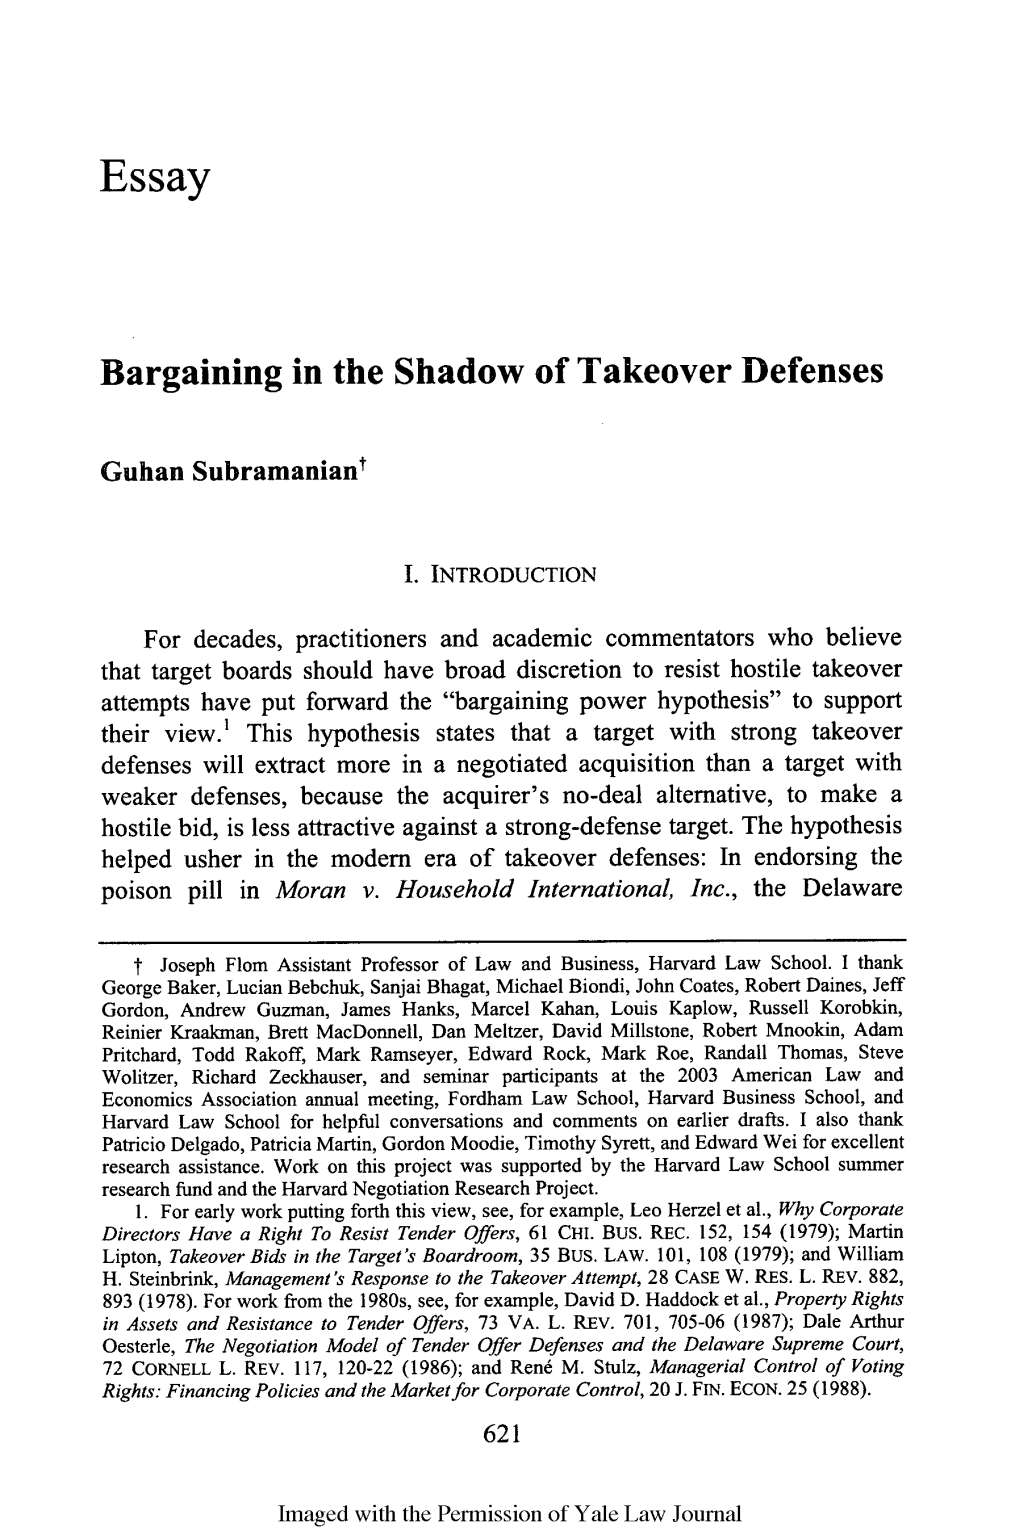 Bargaining in the Shadow of Takeover Defenses